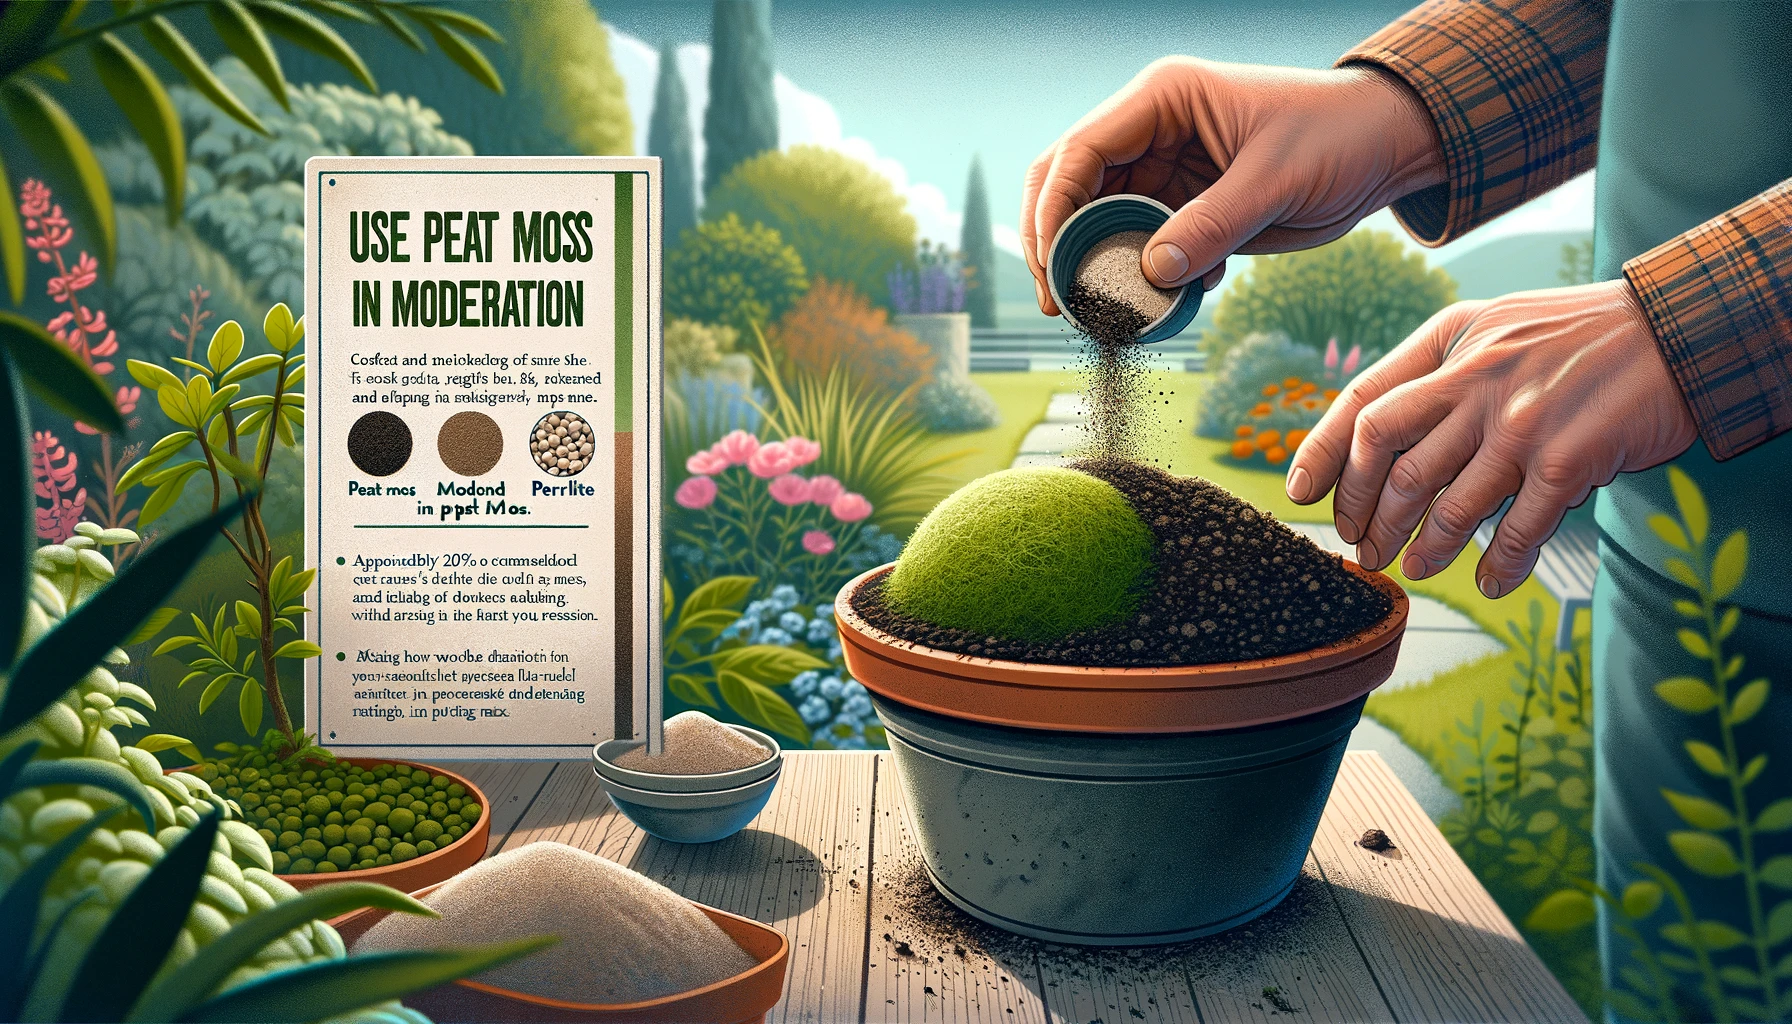 Use Peat Moss in Moderation